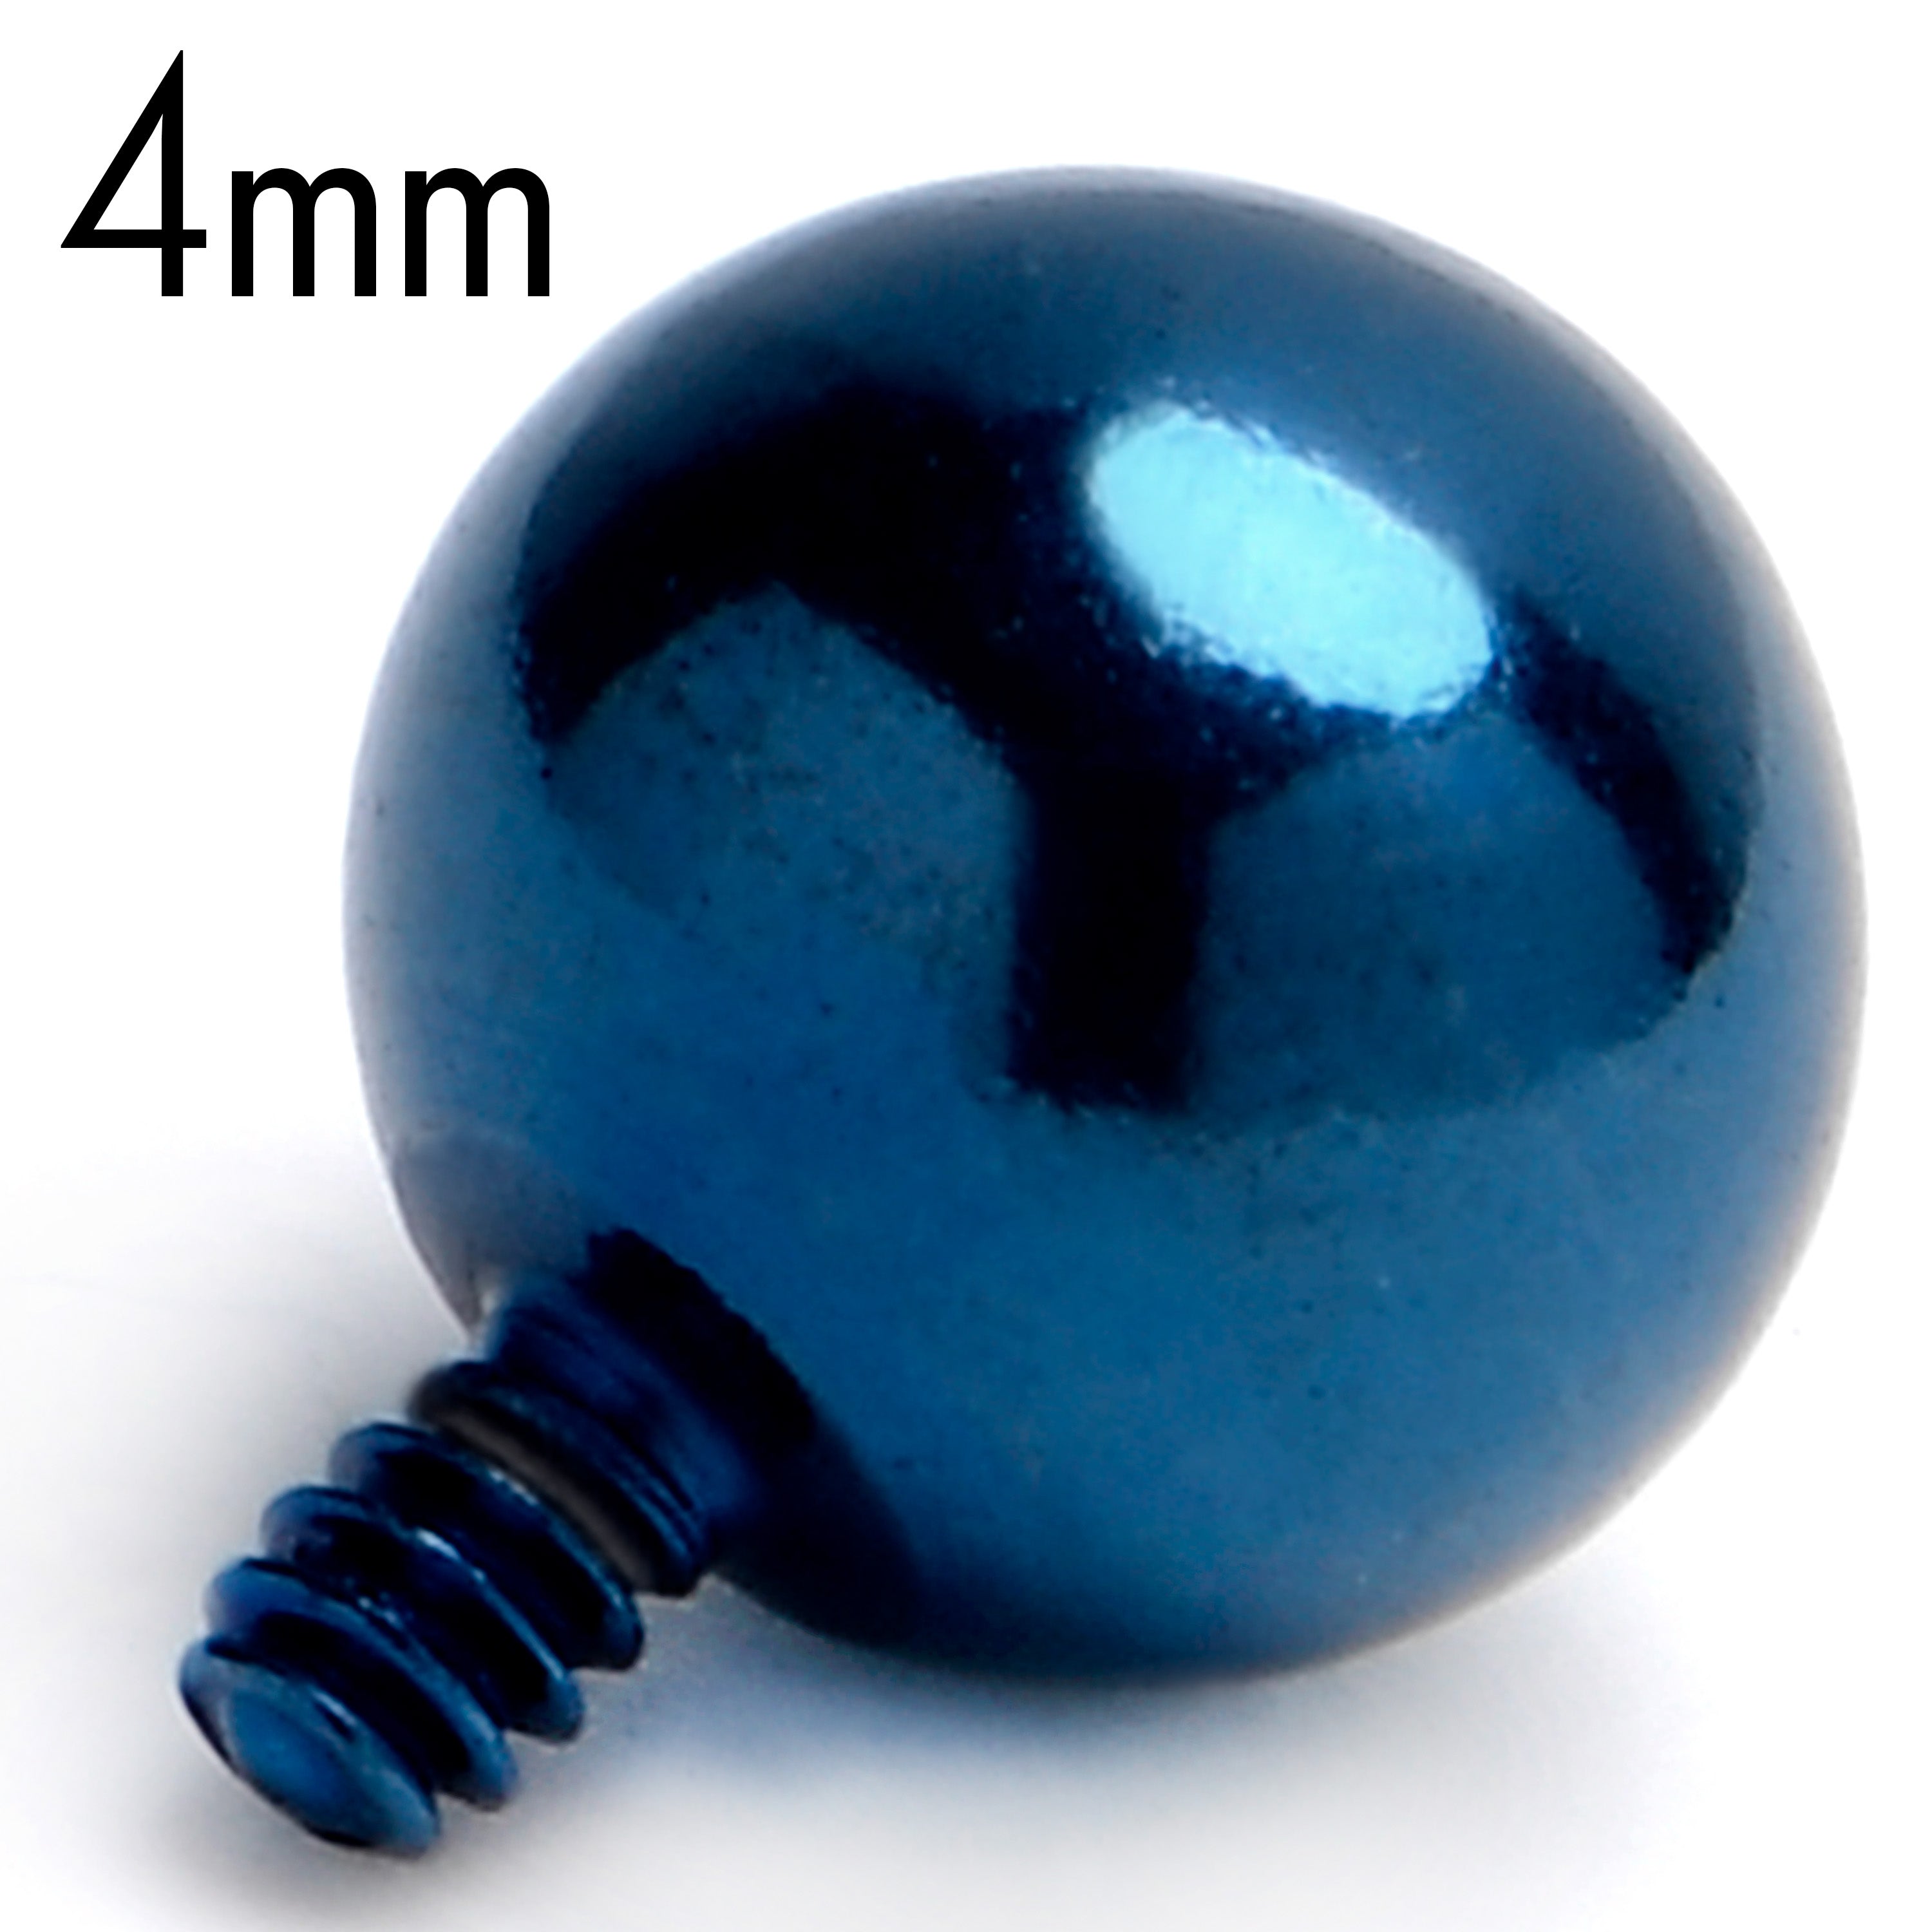 16 Gauge 4mm Blue Replacement Ball End Internally Threaded Jewelry